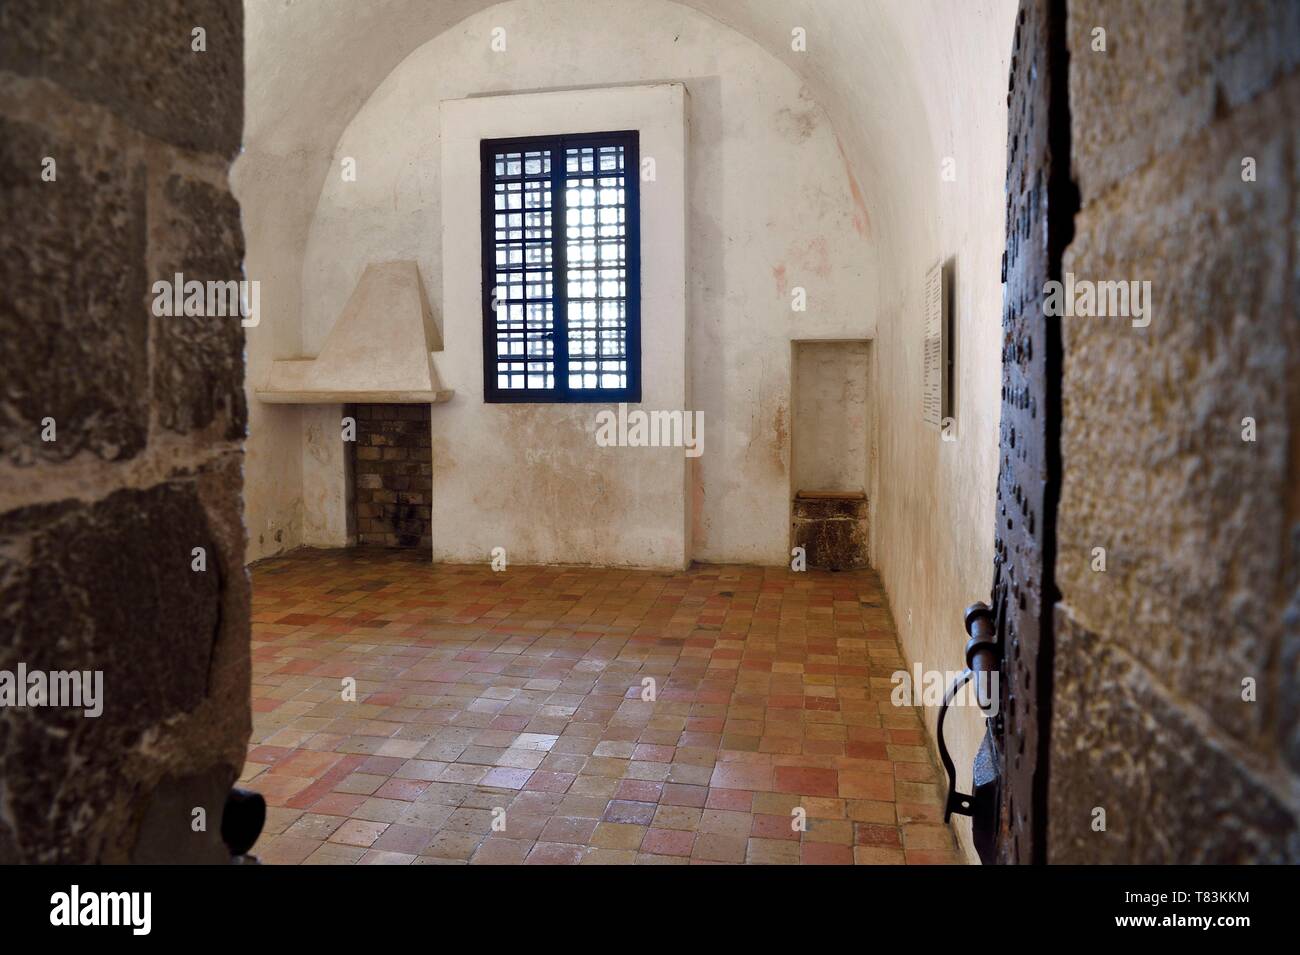 France, Alpes Maritimes, Lerins Islands, Sainte Marguerite island, the Fort Royal fortified by Vauban, the prison, cell of the Man in the Iron Mask, triple rows of bars at the window Stock Photo